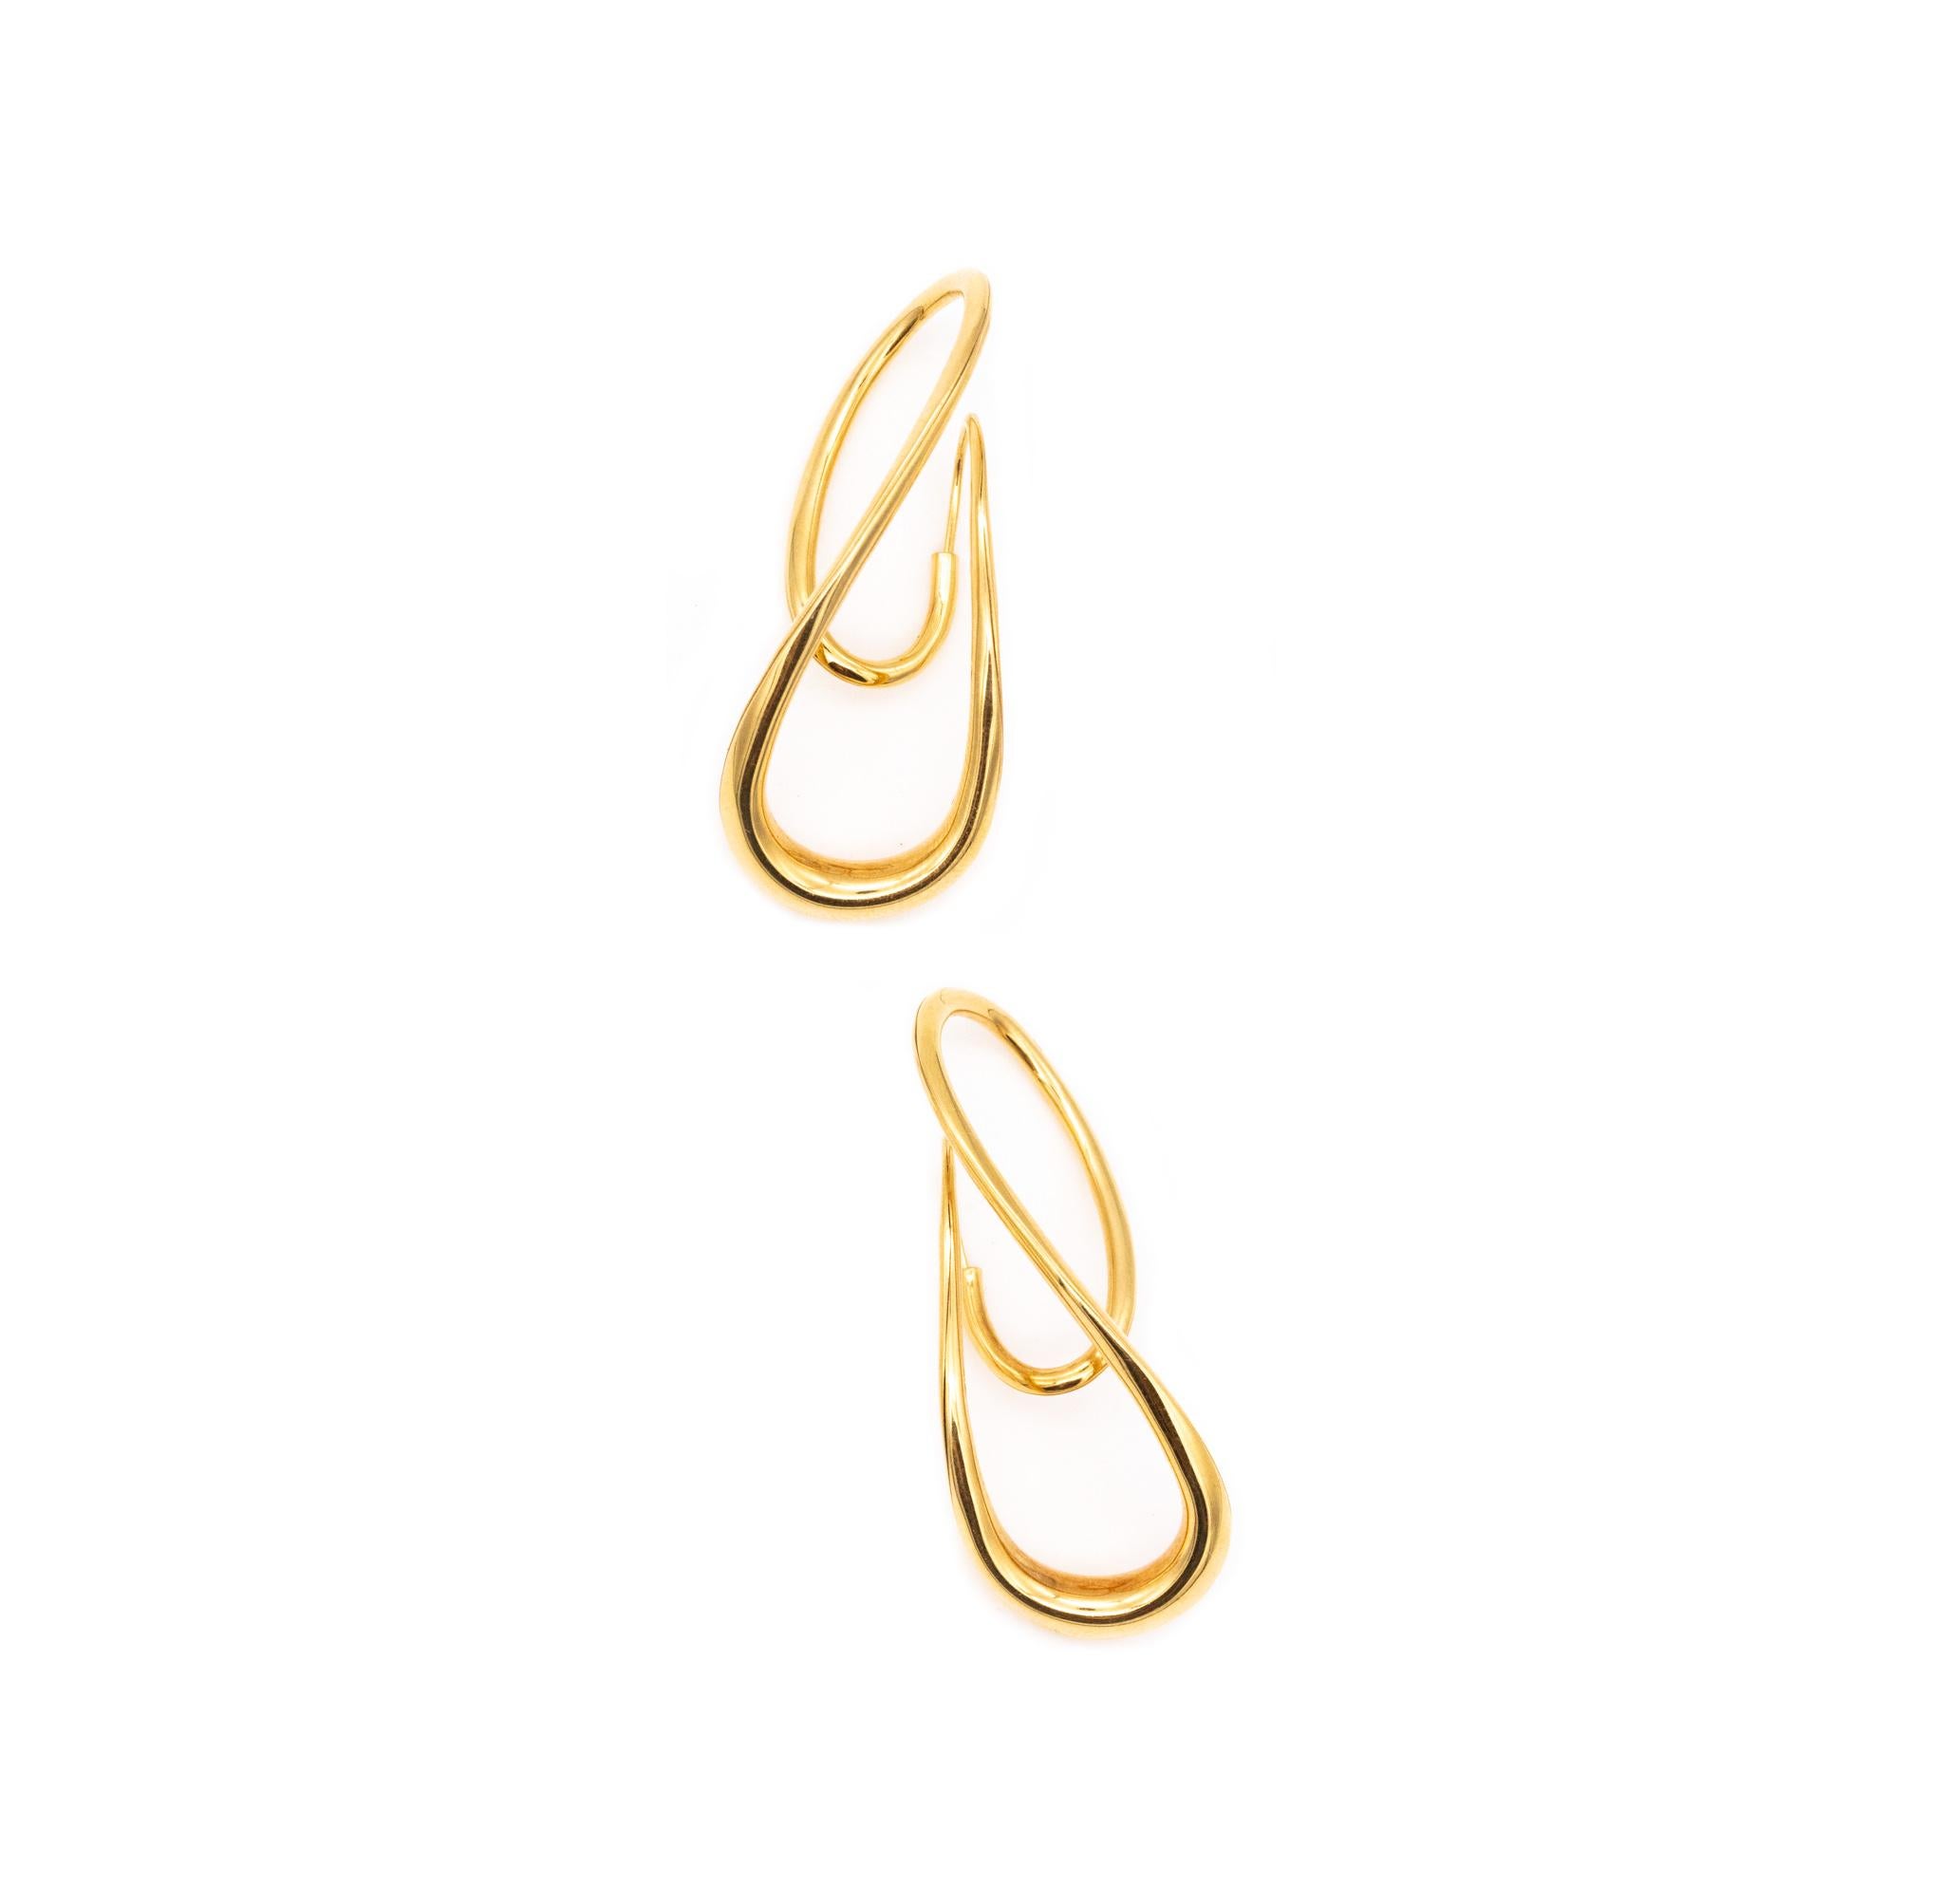 Aerodynamic pair of earrings designed by Michael Good.

Beautiful twisted wired pair, crafted in 18 karats of high polished yellow gold and suited with discrete posts to wear in pierced ears.

Have a weight of 8.4 grams and a measures of 41 mm (1.6